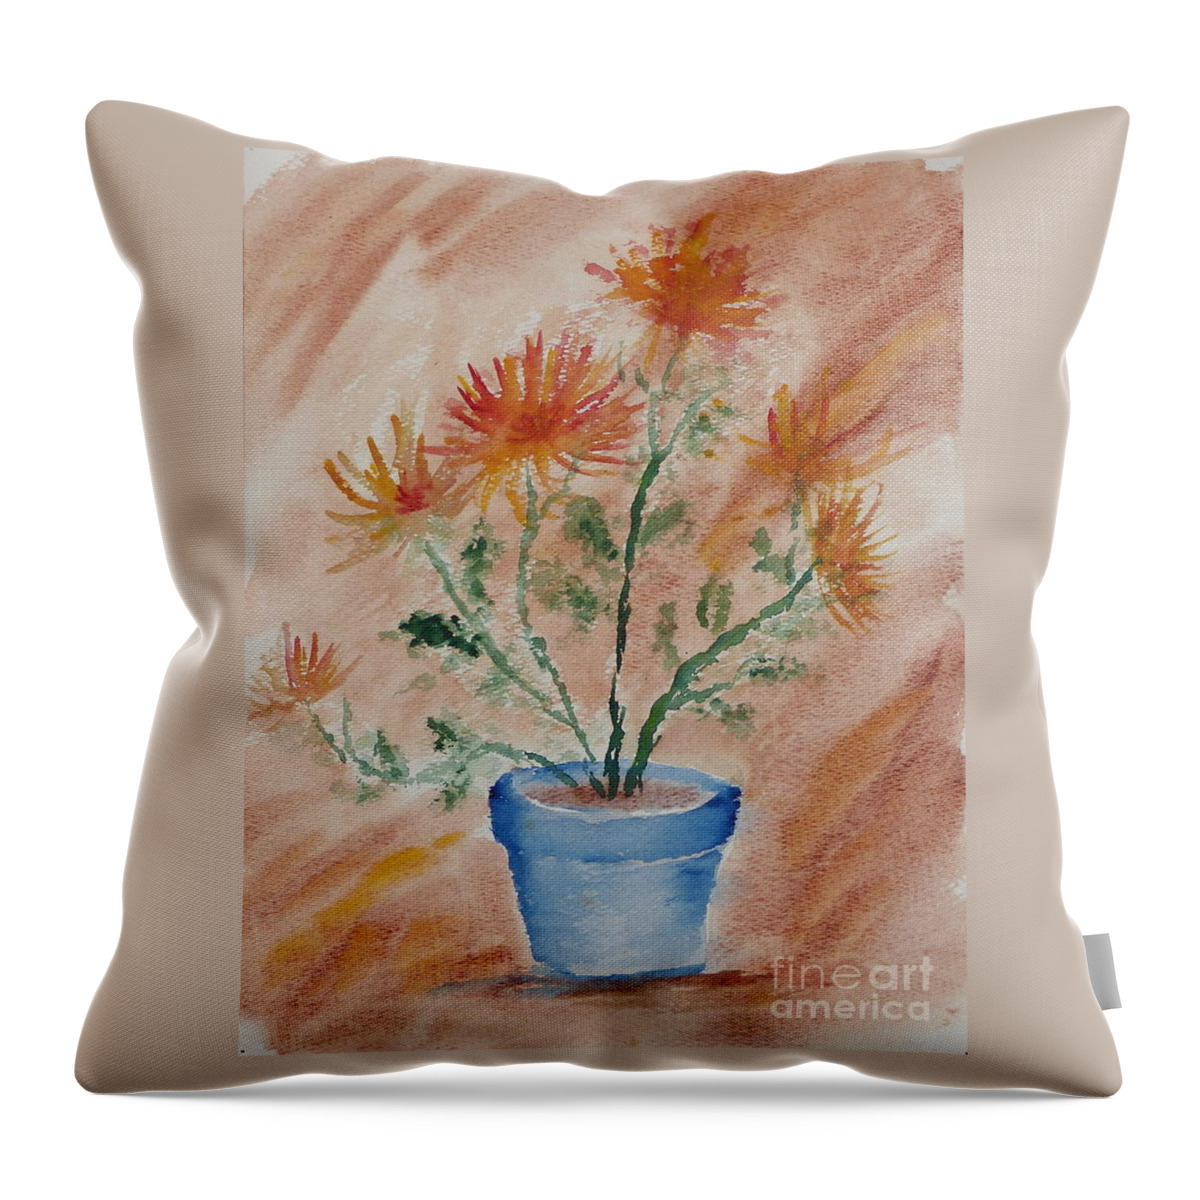 Potted Plant Throw Pillow featuring the painting Potted Plant - A Watercolor by Eleanor Robinson